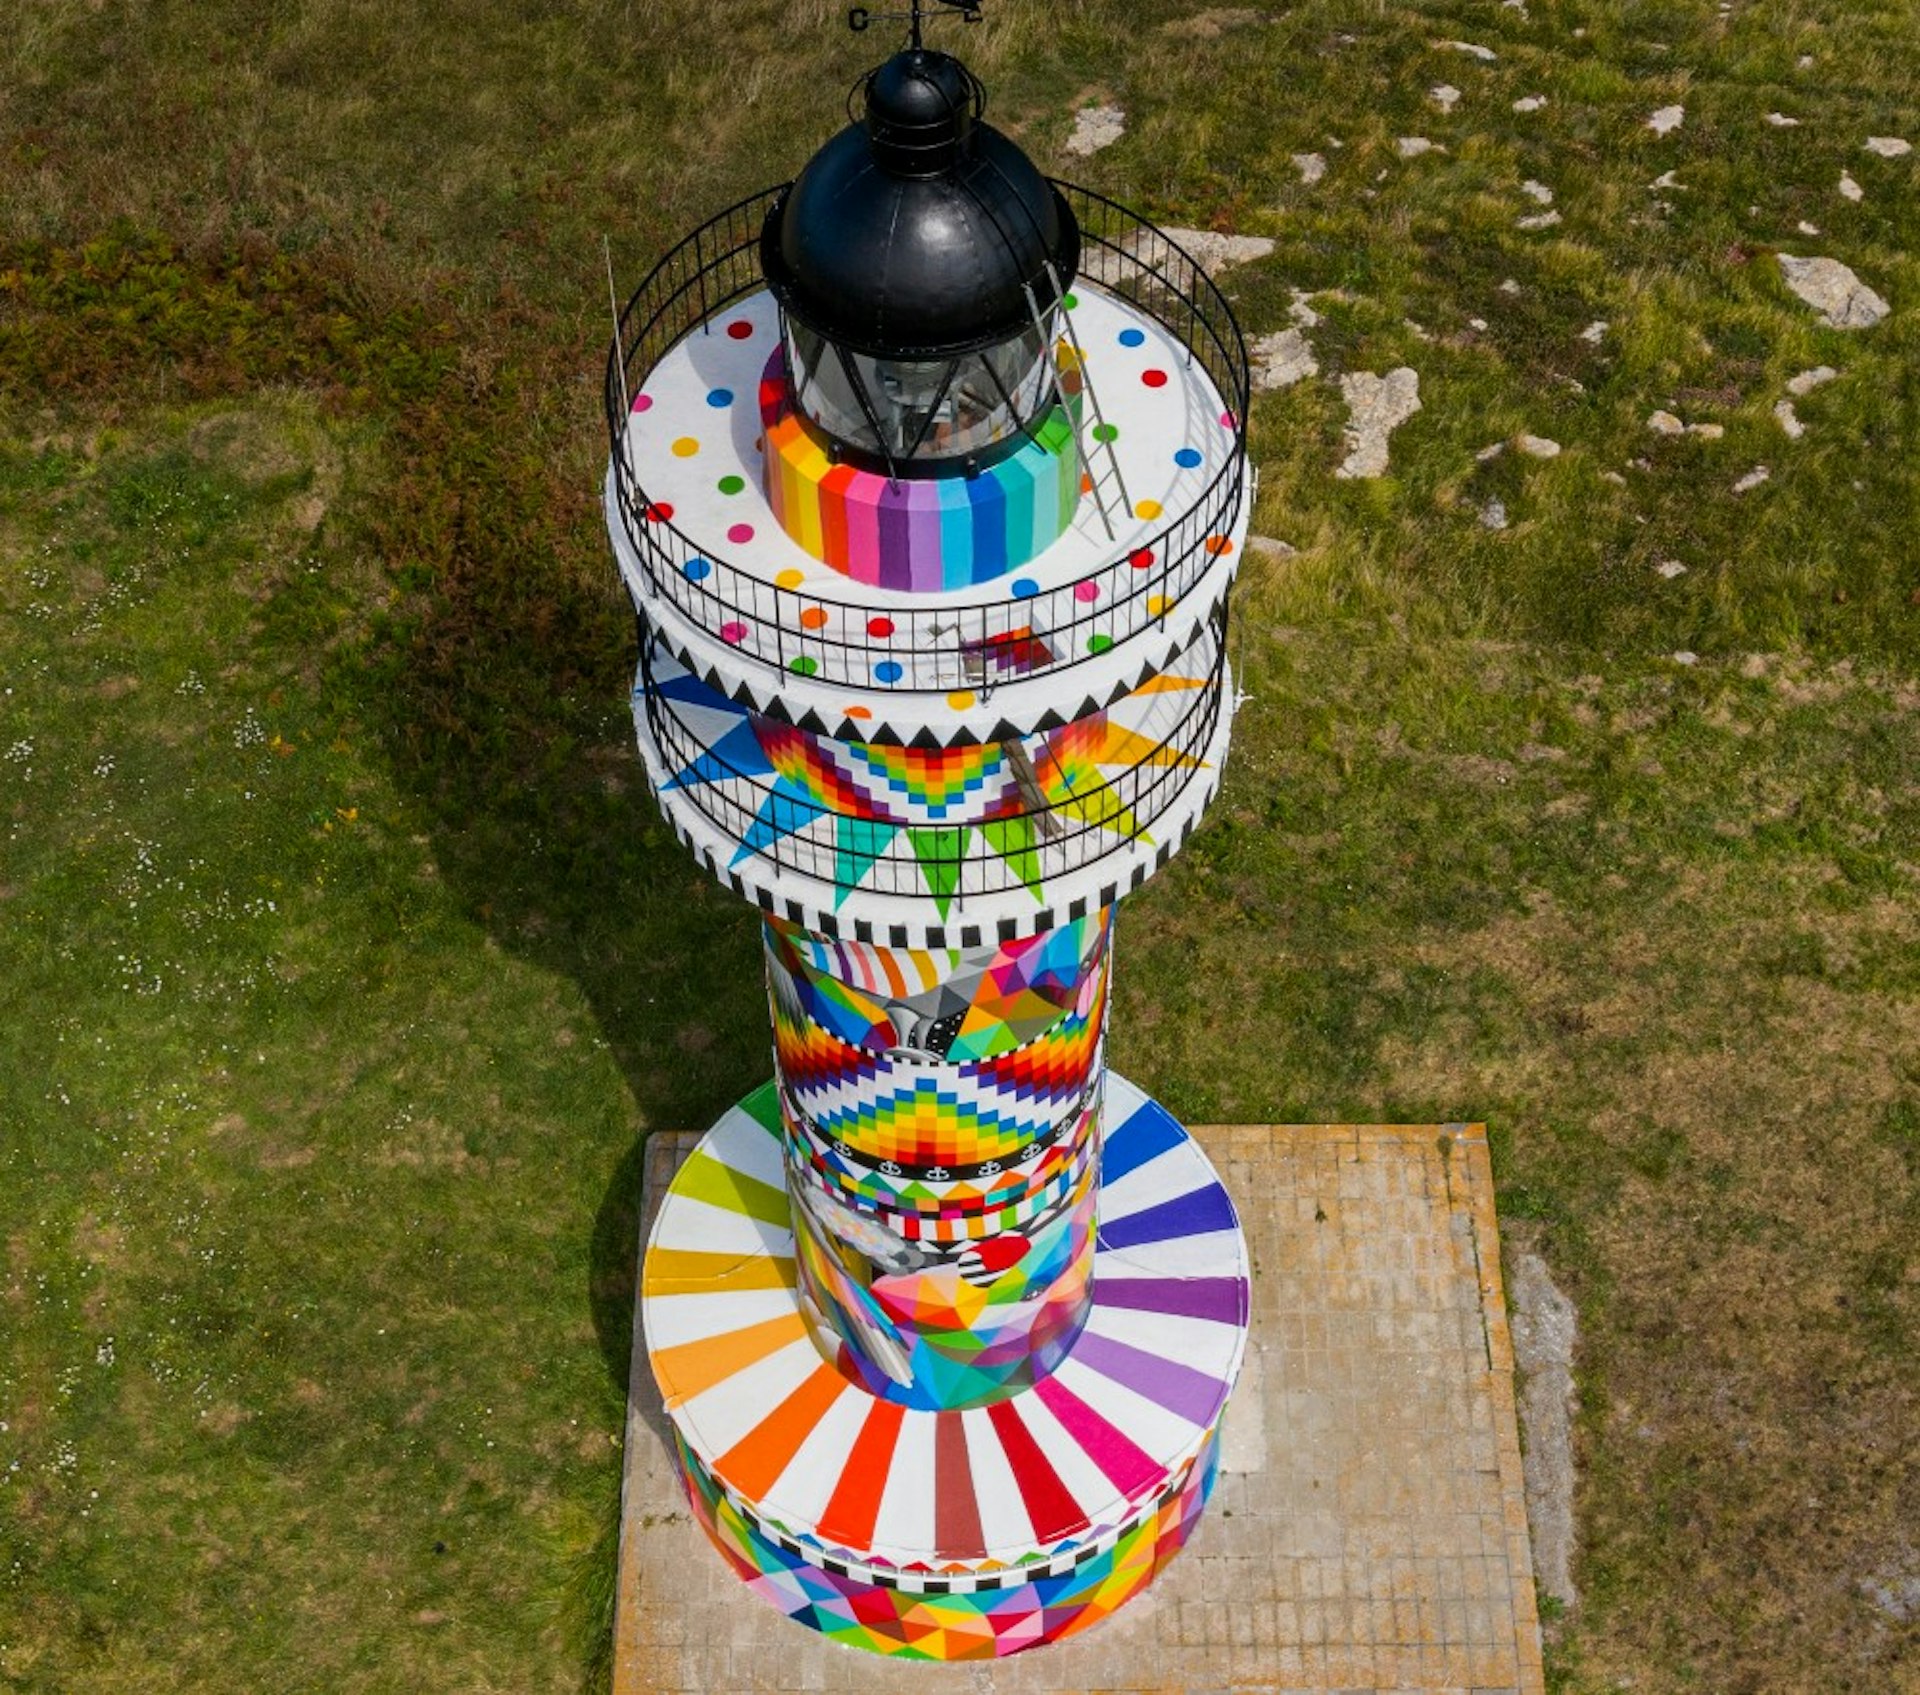 The Faro de Ajo lighthouse in Spain with a new vibrant makeover